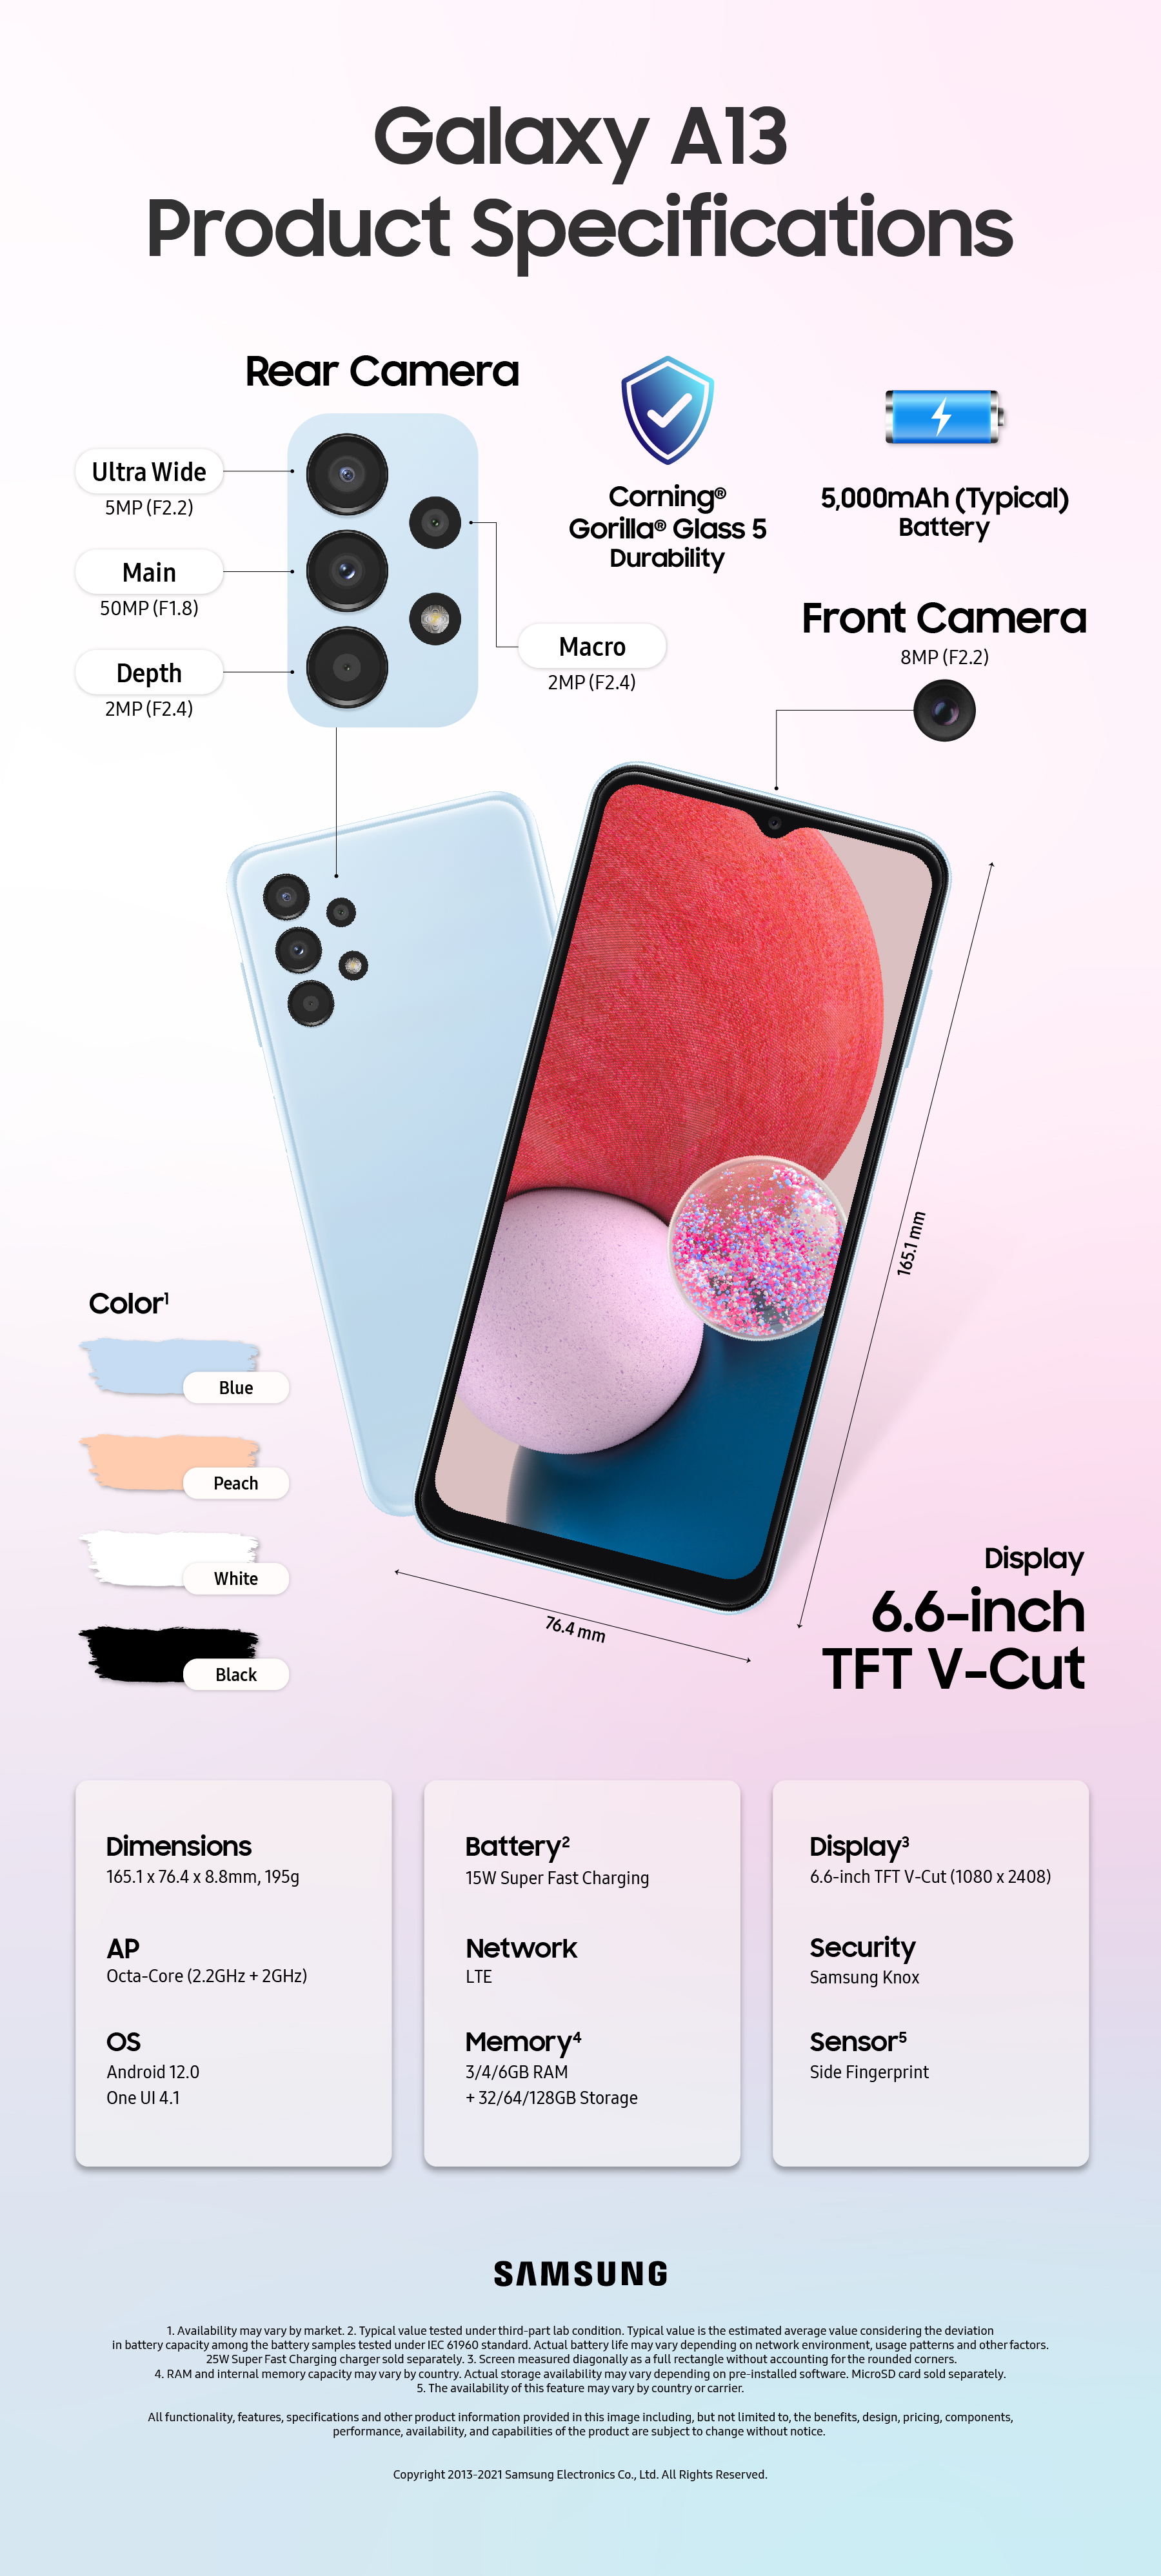 Infographic] Galaxy A23 Brings Users All the Galaxy Innovations